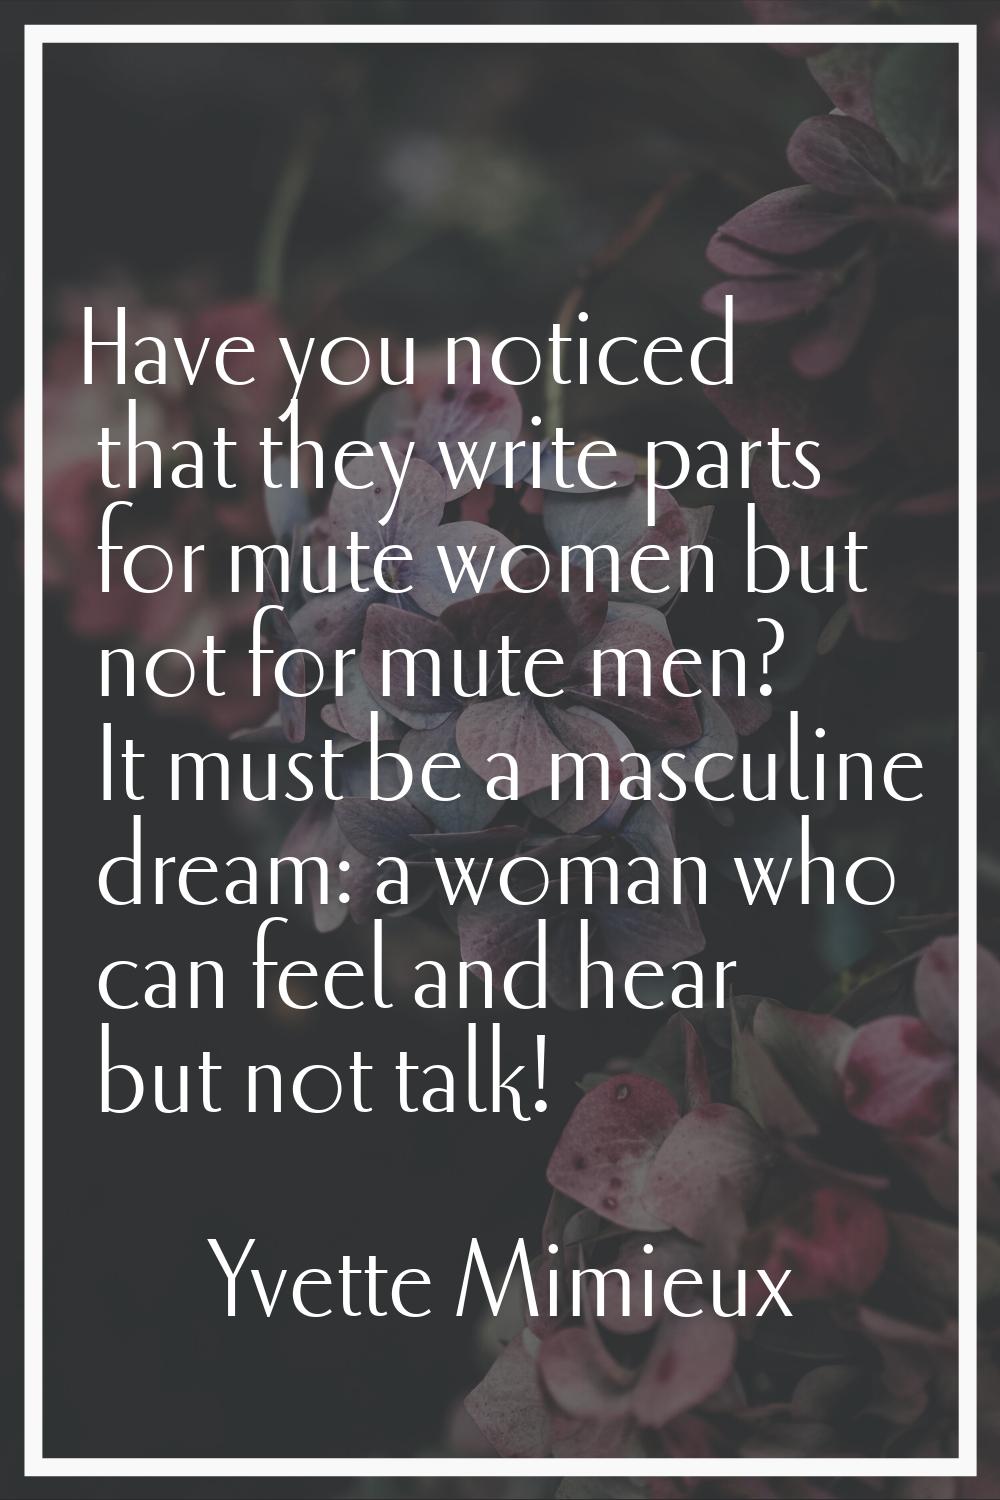 Have you noticed that they write parts for mute women but not for mute men? It must be a masculine 